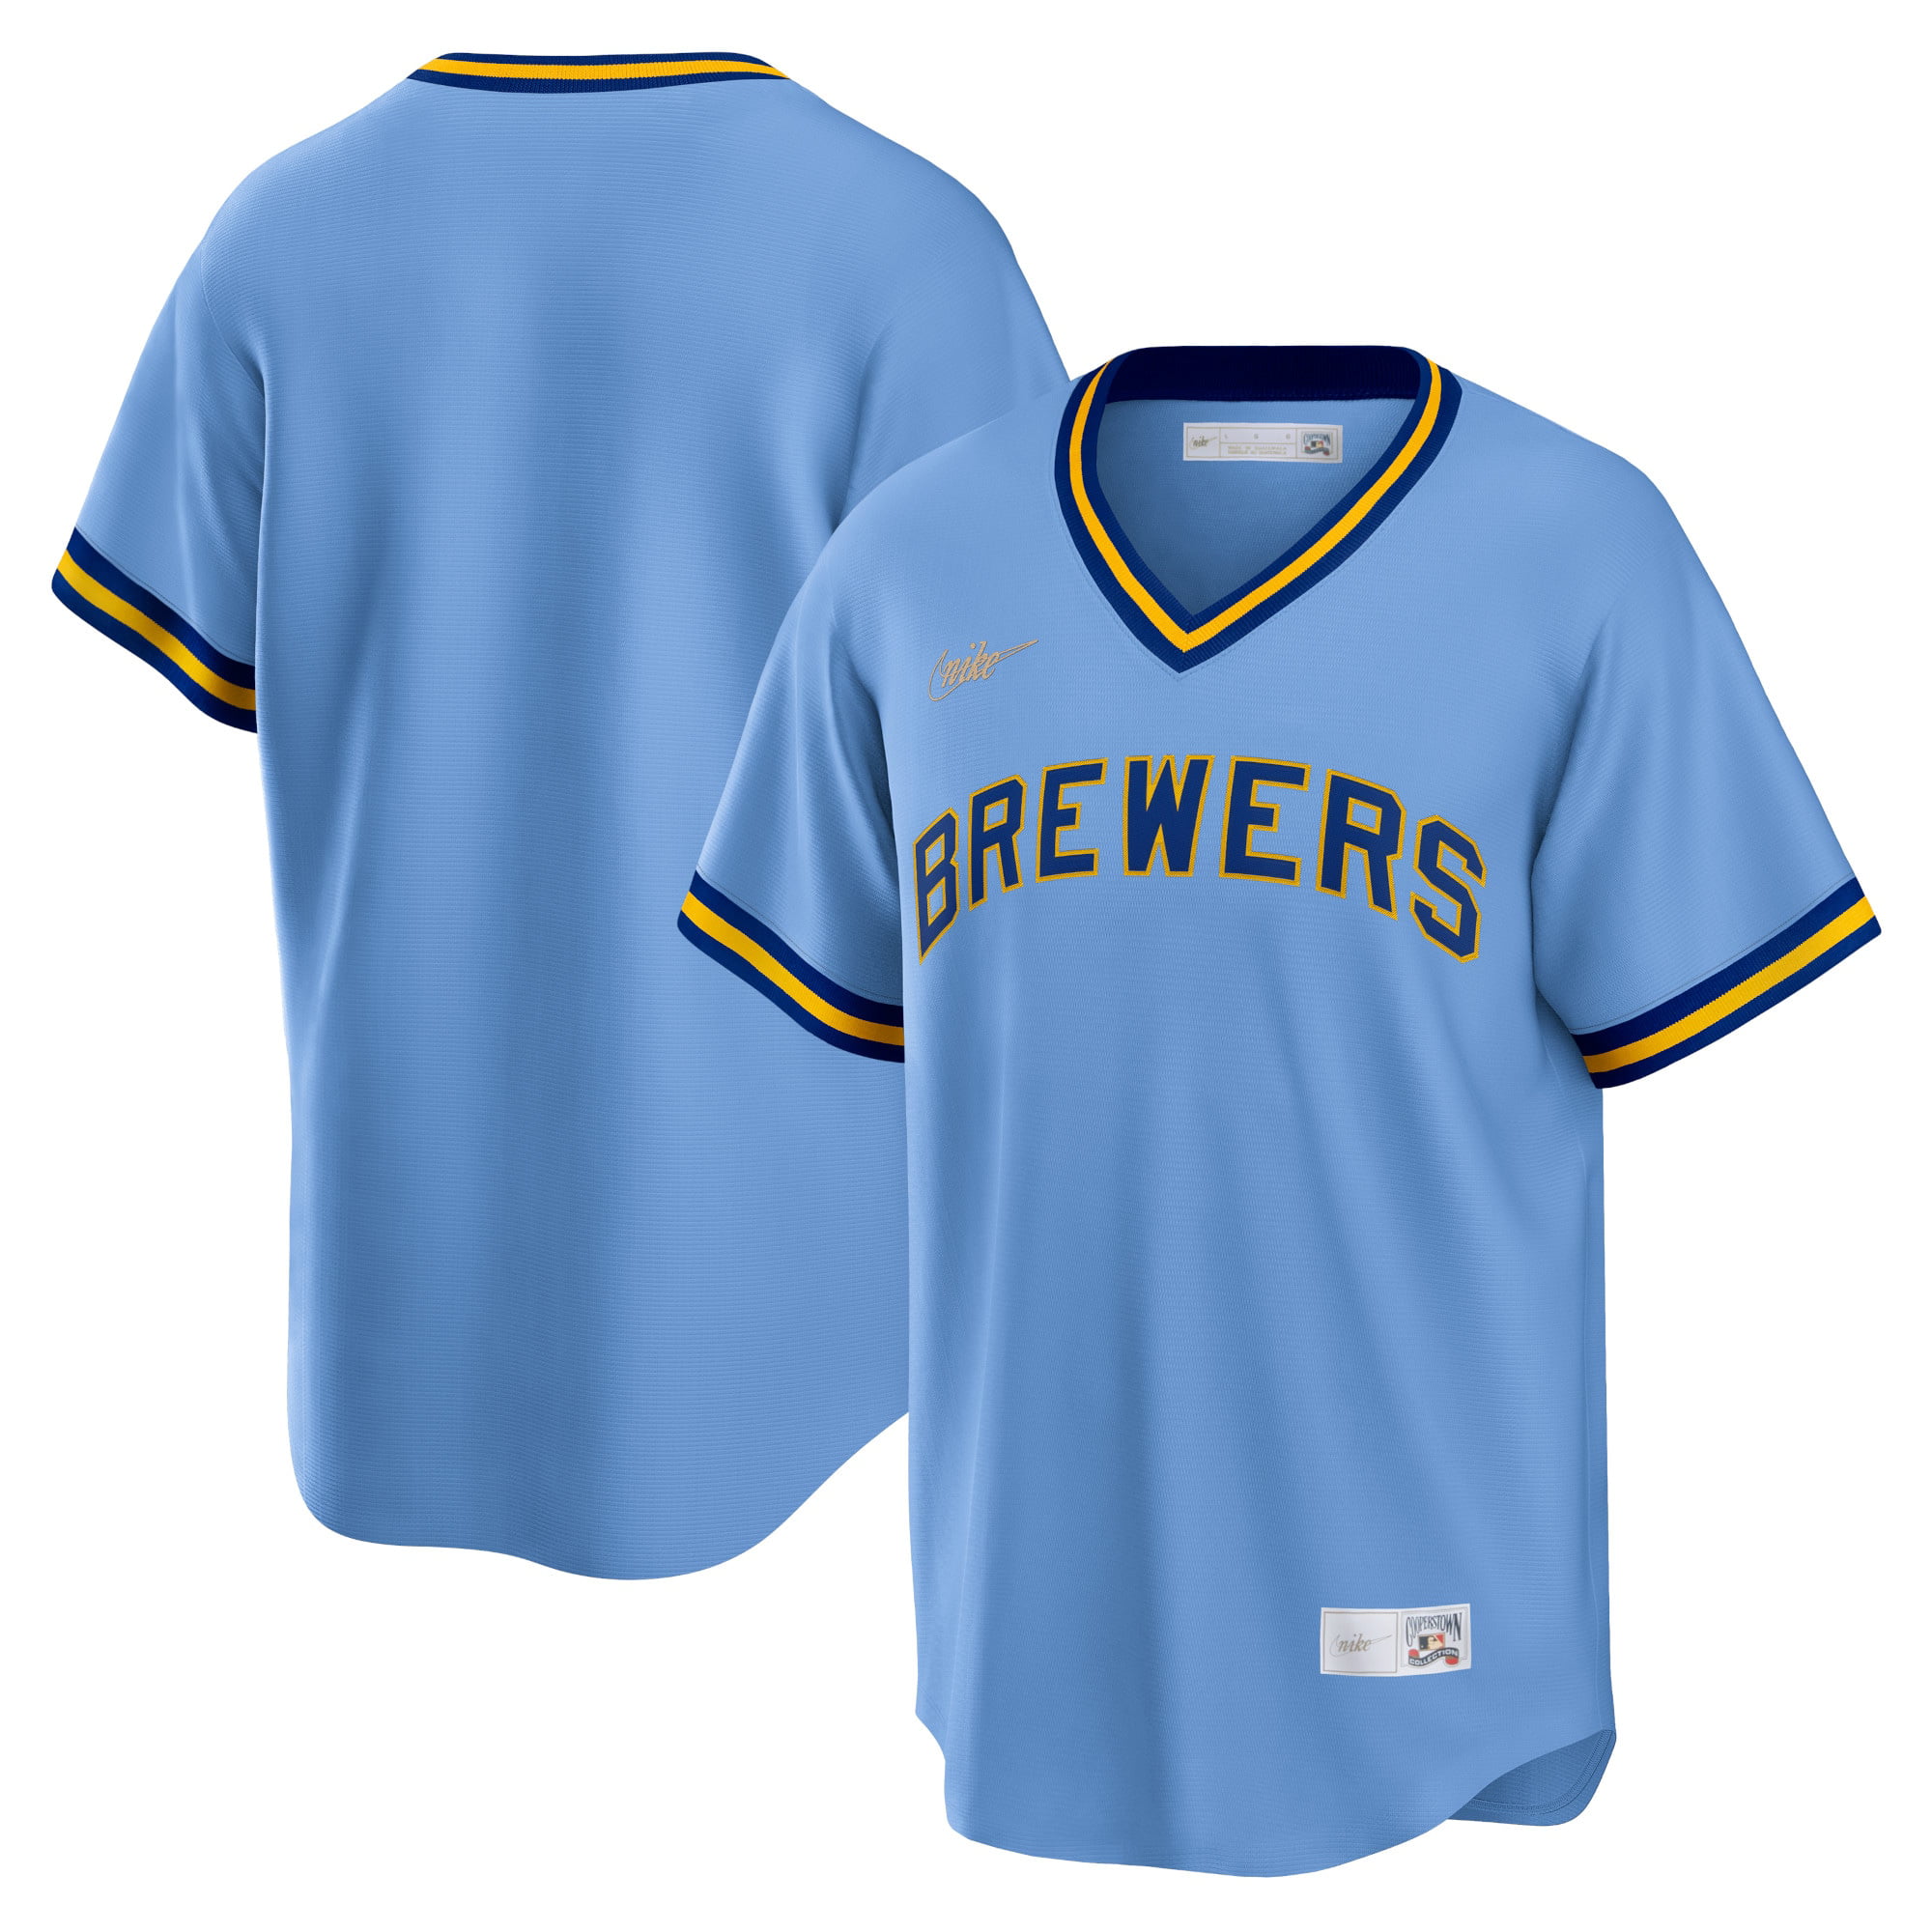 Men's Nike Powder Blue Milwaukee Brewers Road Cooperstown Collection Team Jersey, XL